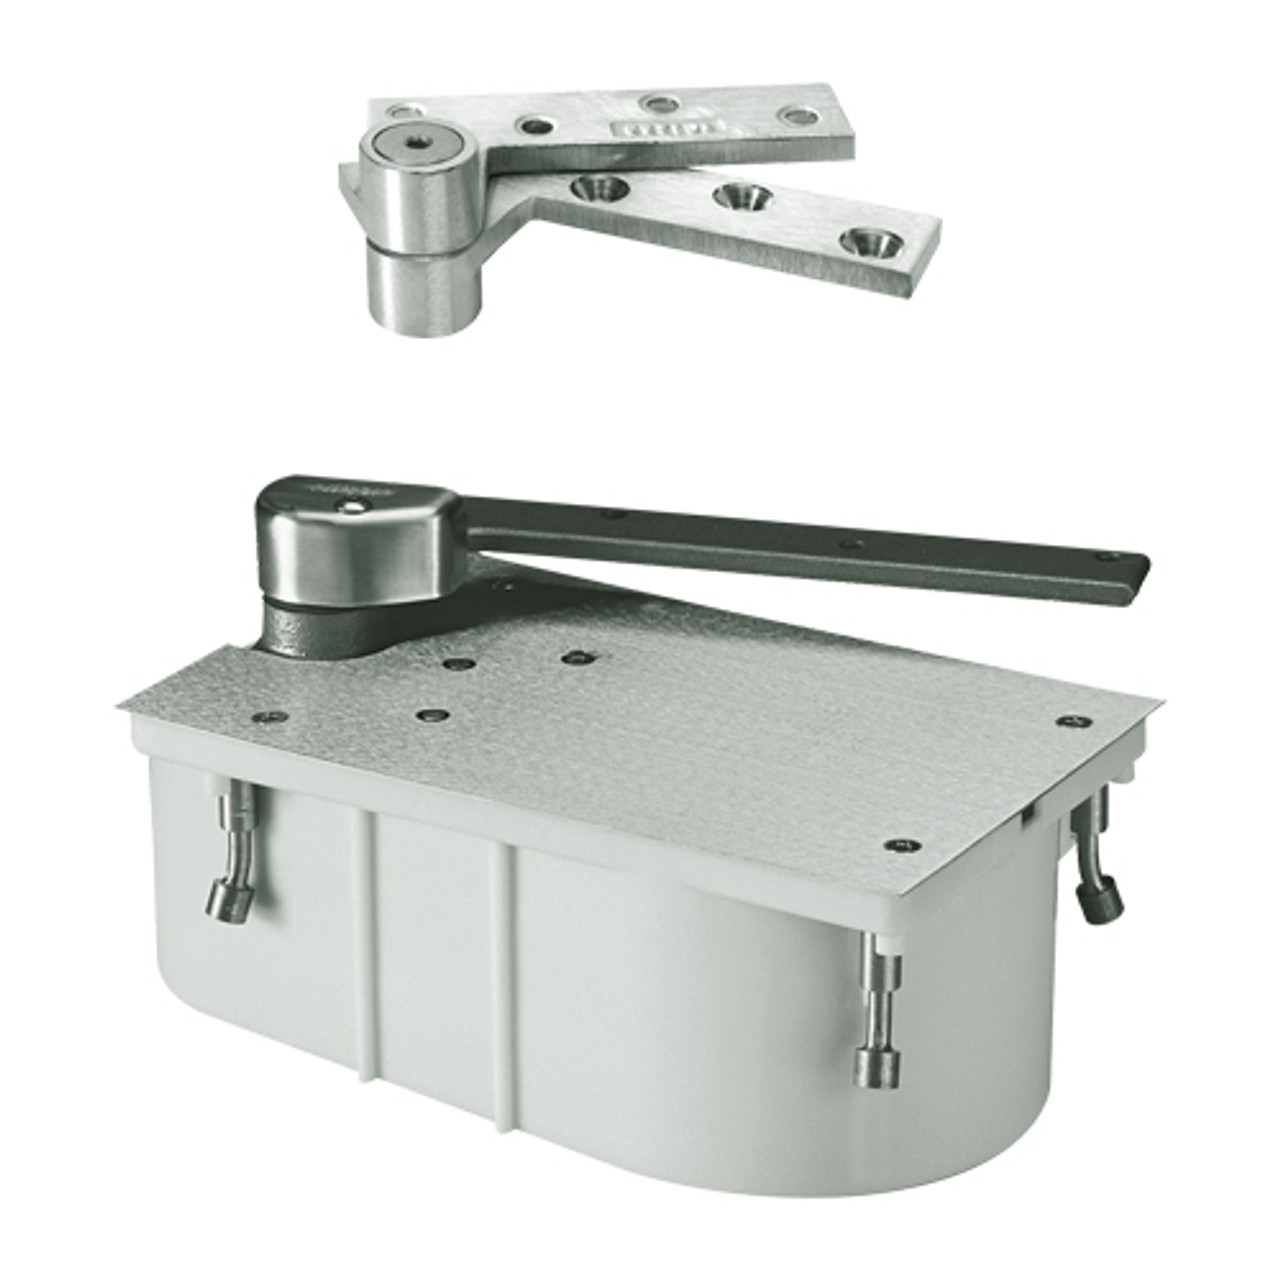 PH27-105N-LH-619 Rixson 27 Series Heavy Duty 3/4" Offset Hung Floor Closer with Physically Handicapped Opening Force in Satin Nickel Finish